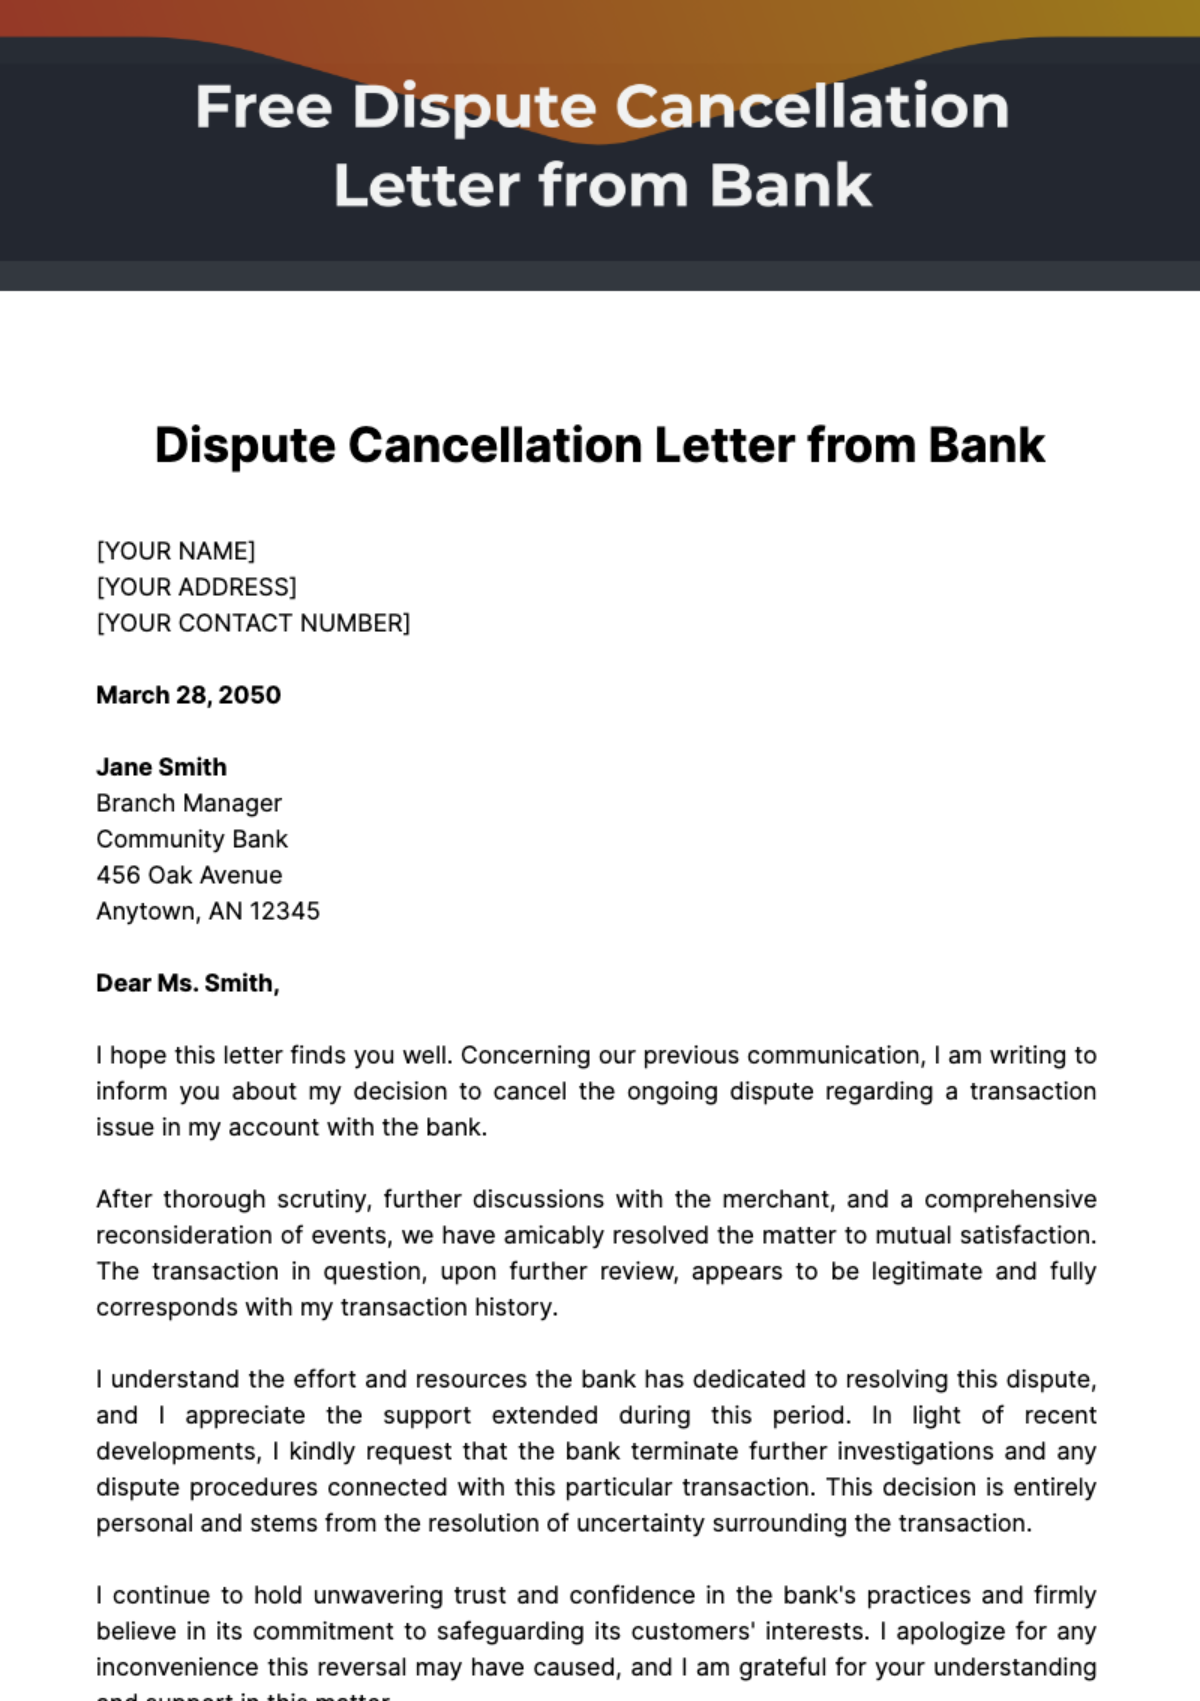 Free Dispute Cancellation Letter from Bank Template